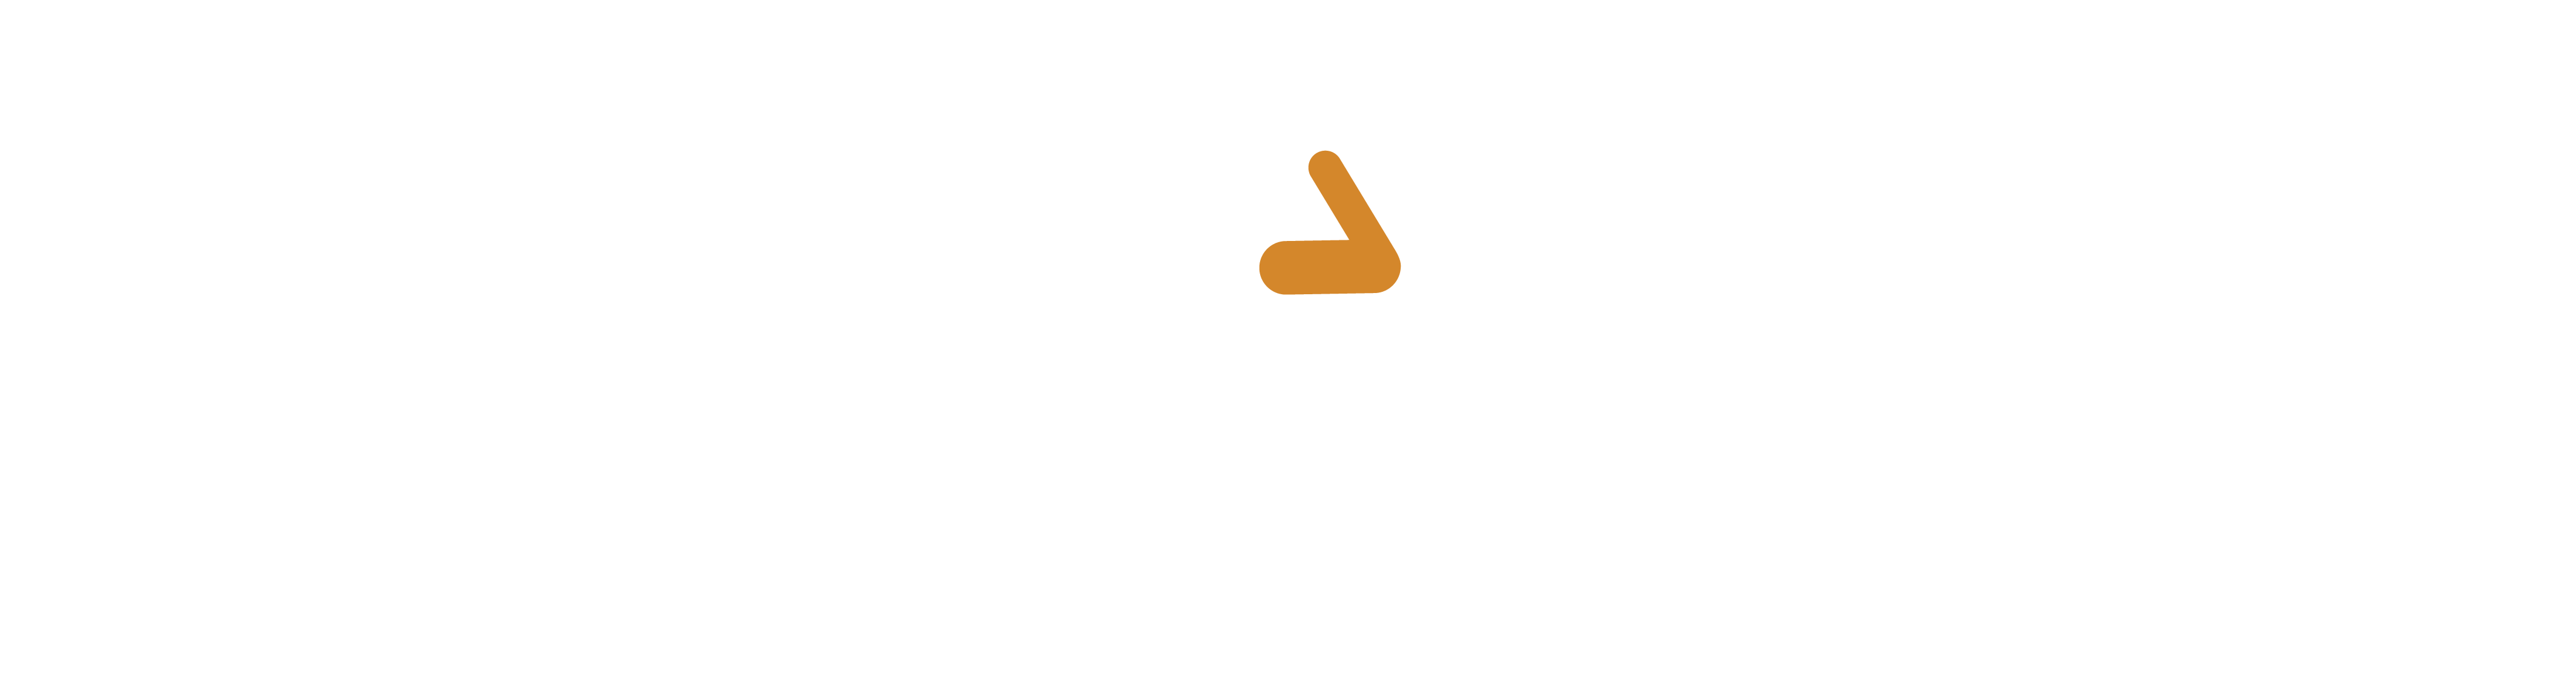 Extens - High Performace Solutions